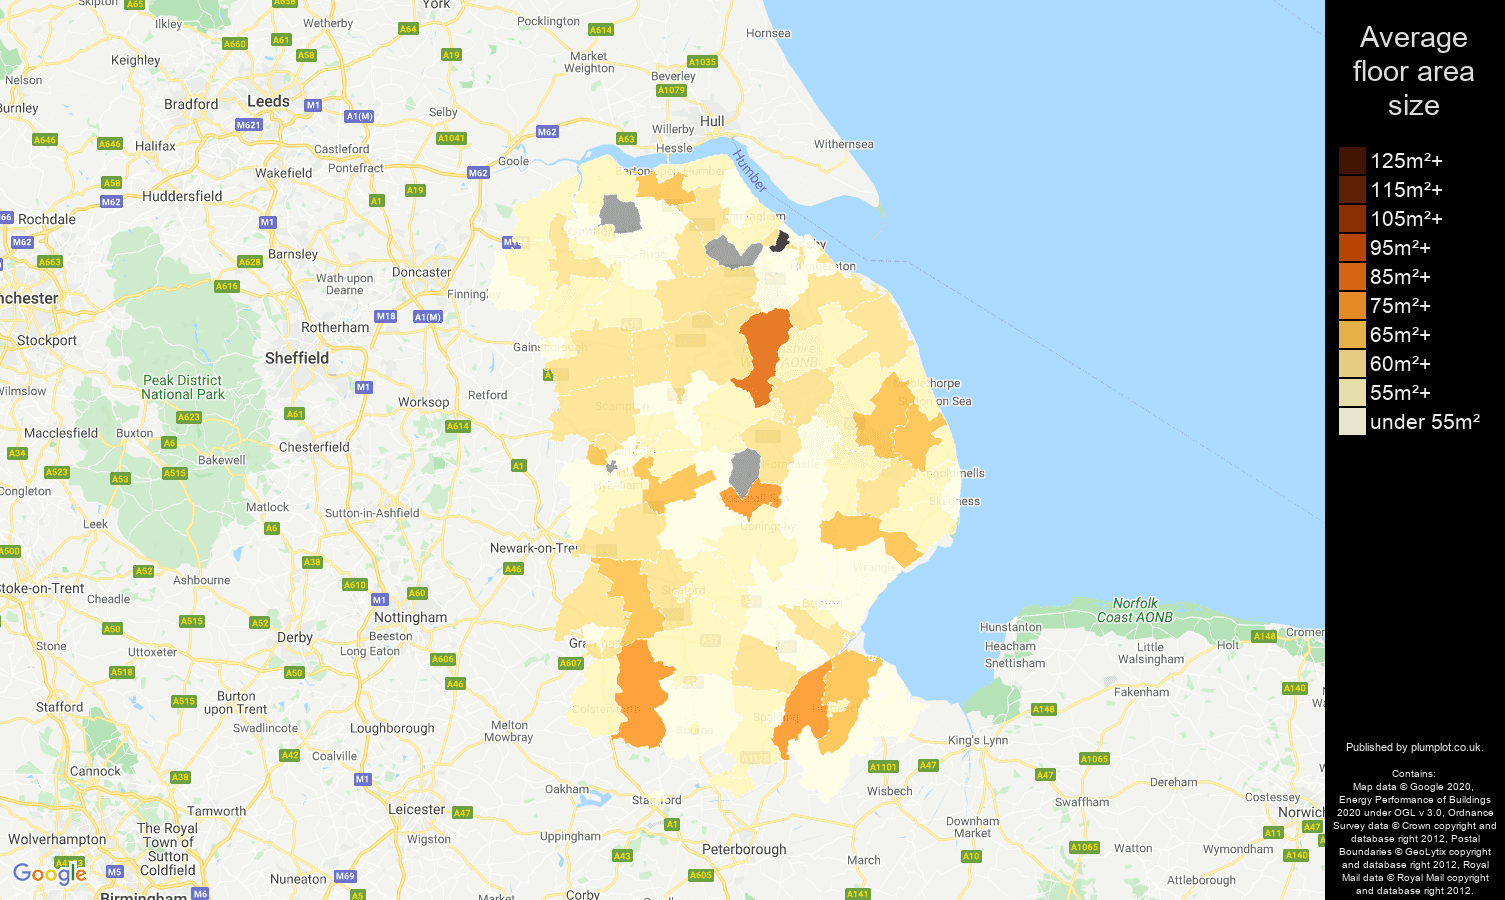 Lincolnshire map of average floor area size of flats